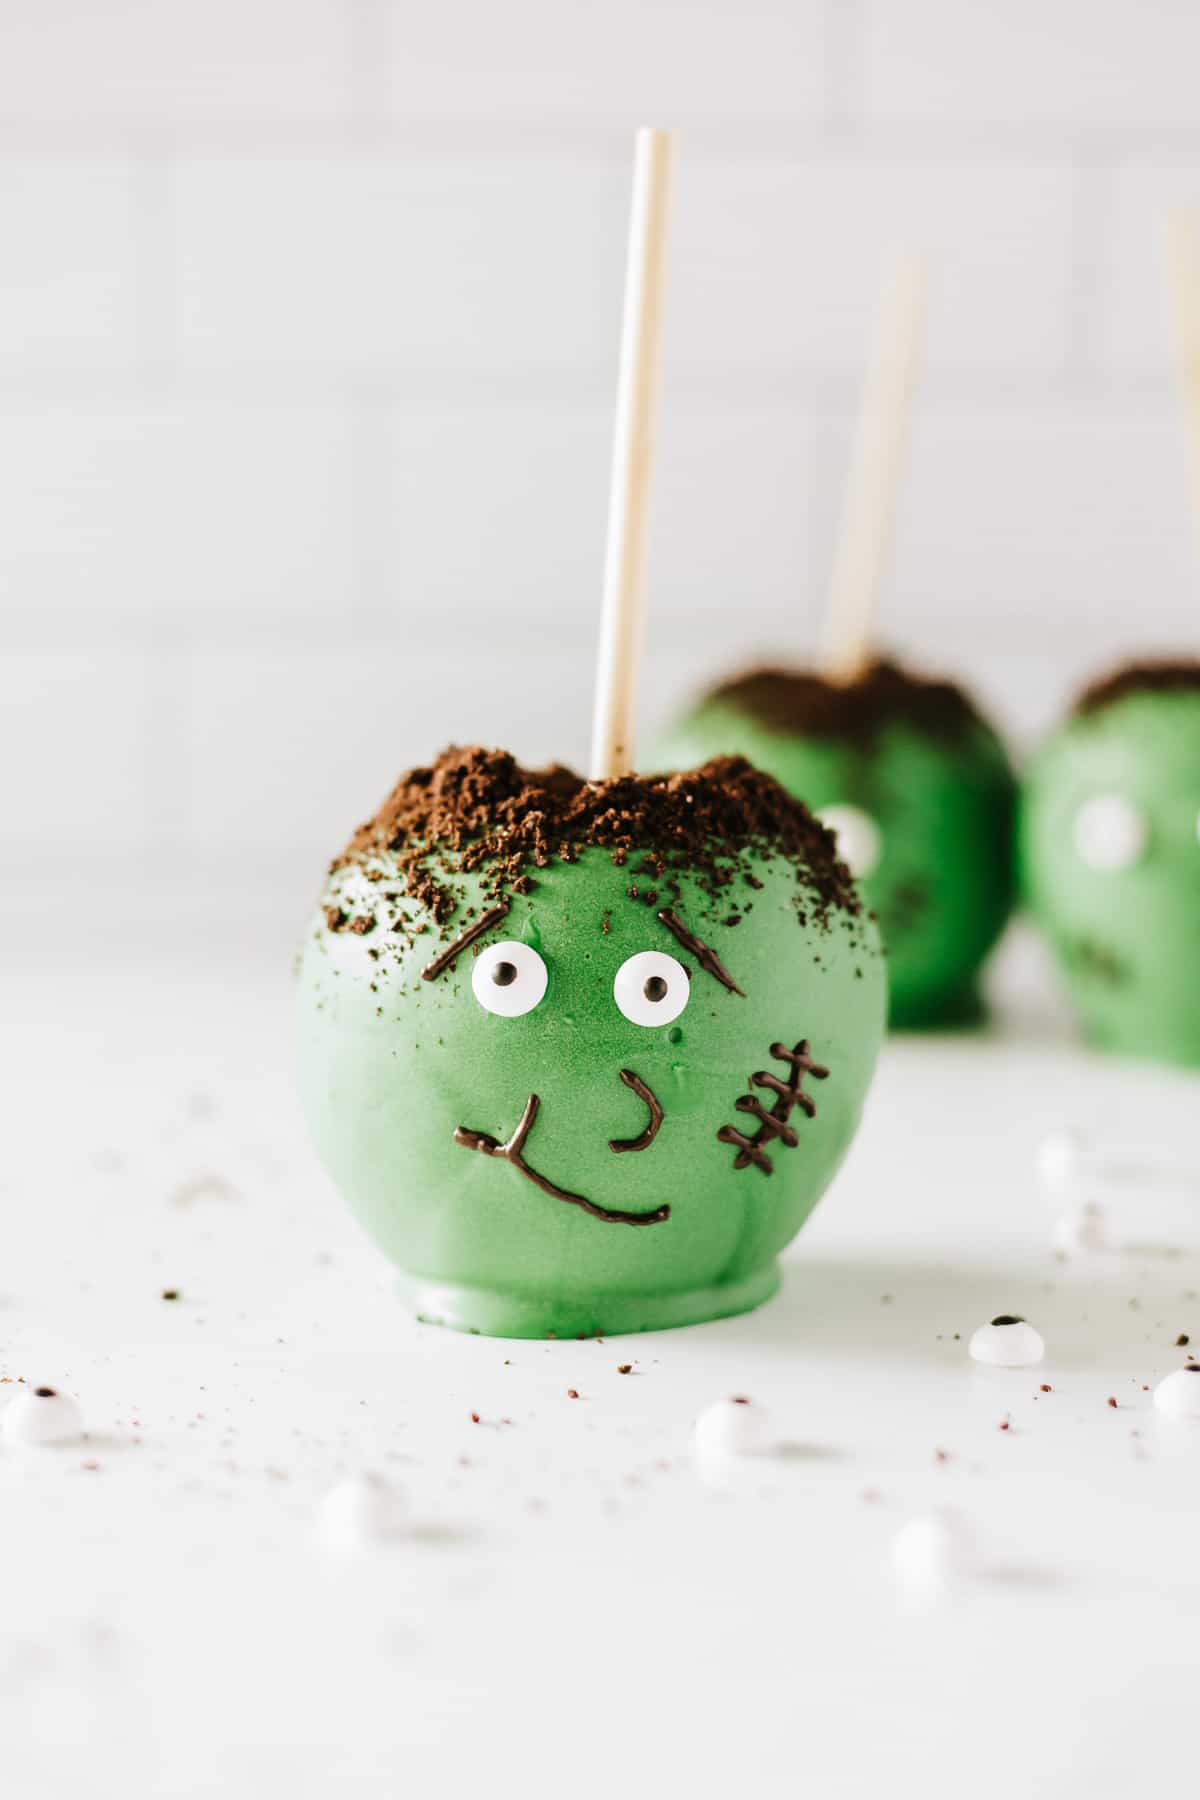 A Frankenstein candy apple on a white background with 2 more blurred in the background.